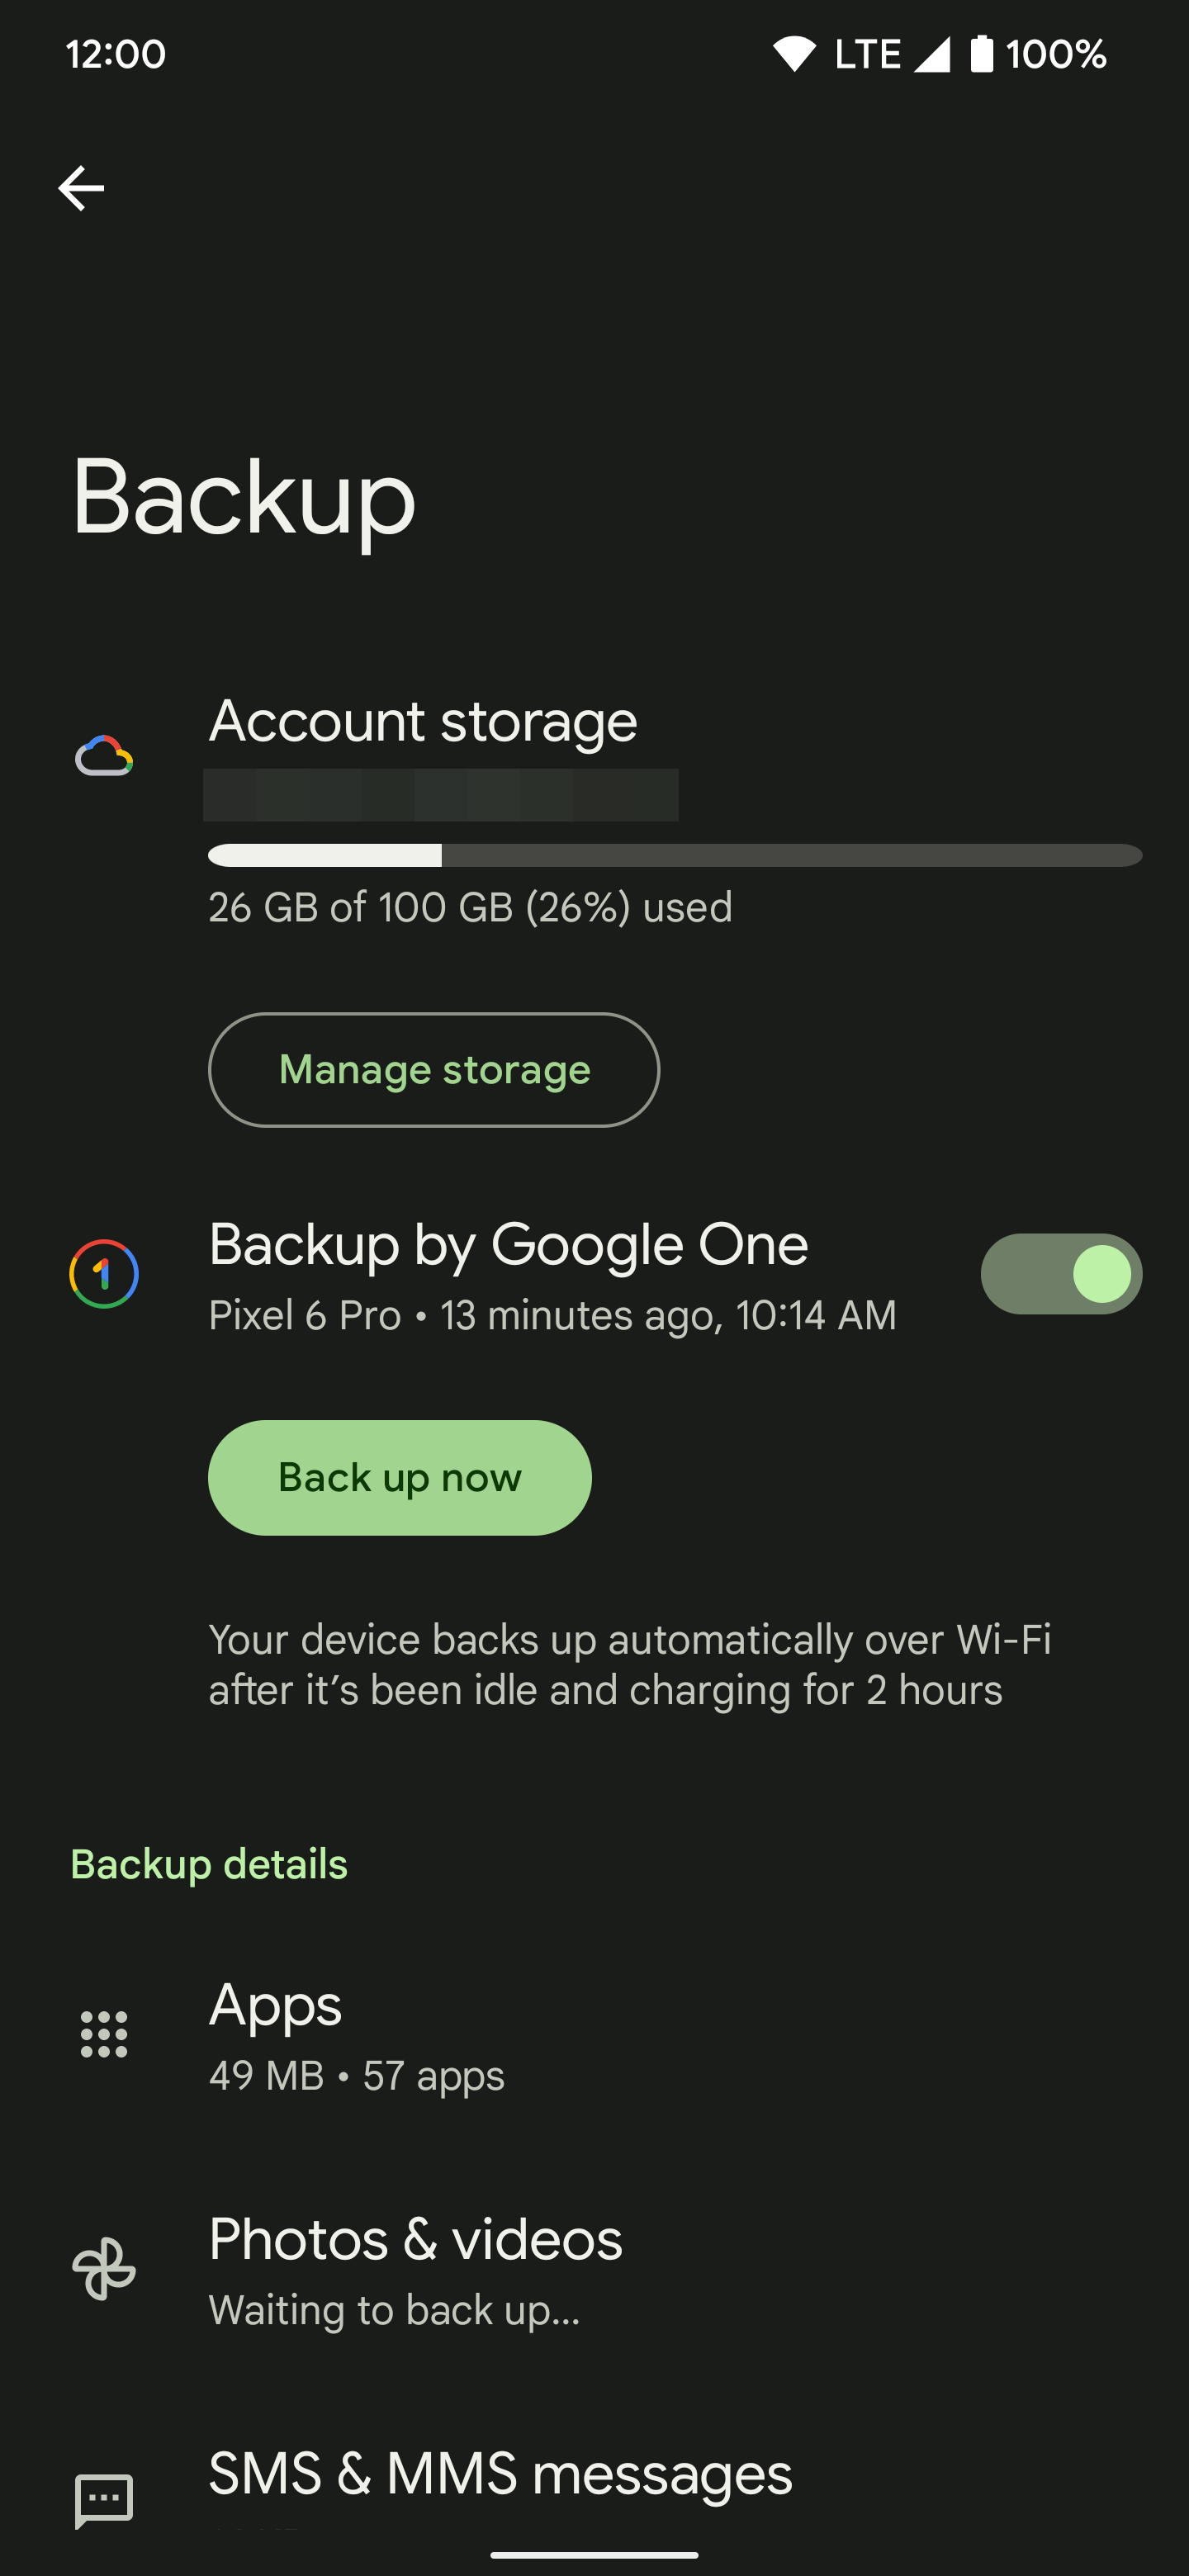 A backup for the Pixel 6 Pro was previously made minutes ago